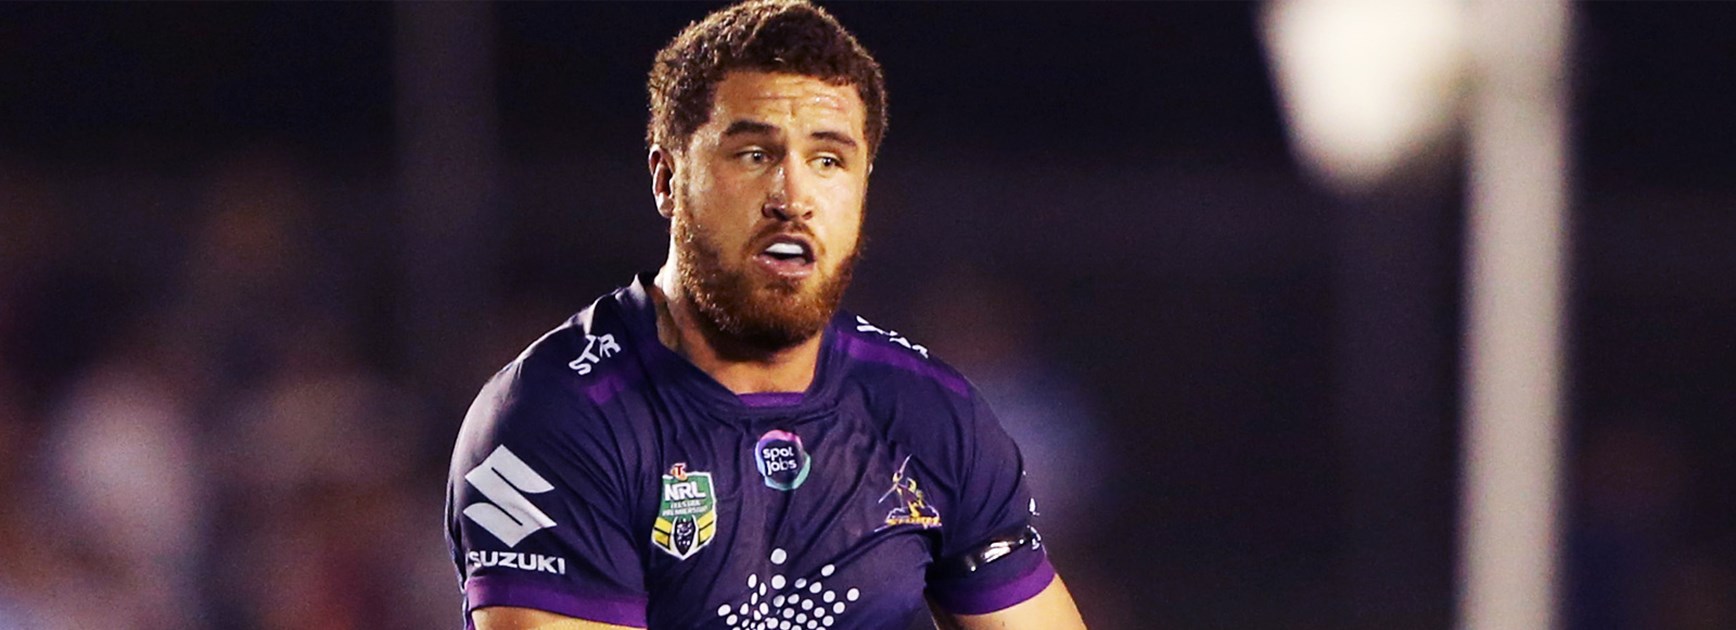 Melbourne's Kenny Bromwich is set to play his 50th NRL game with the Storm.